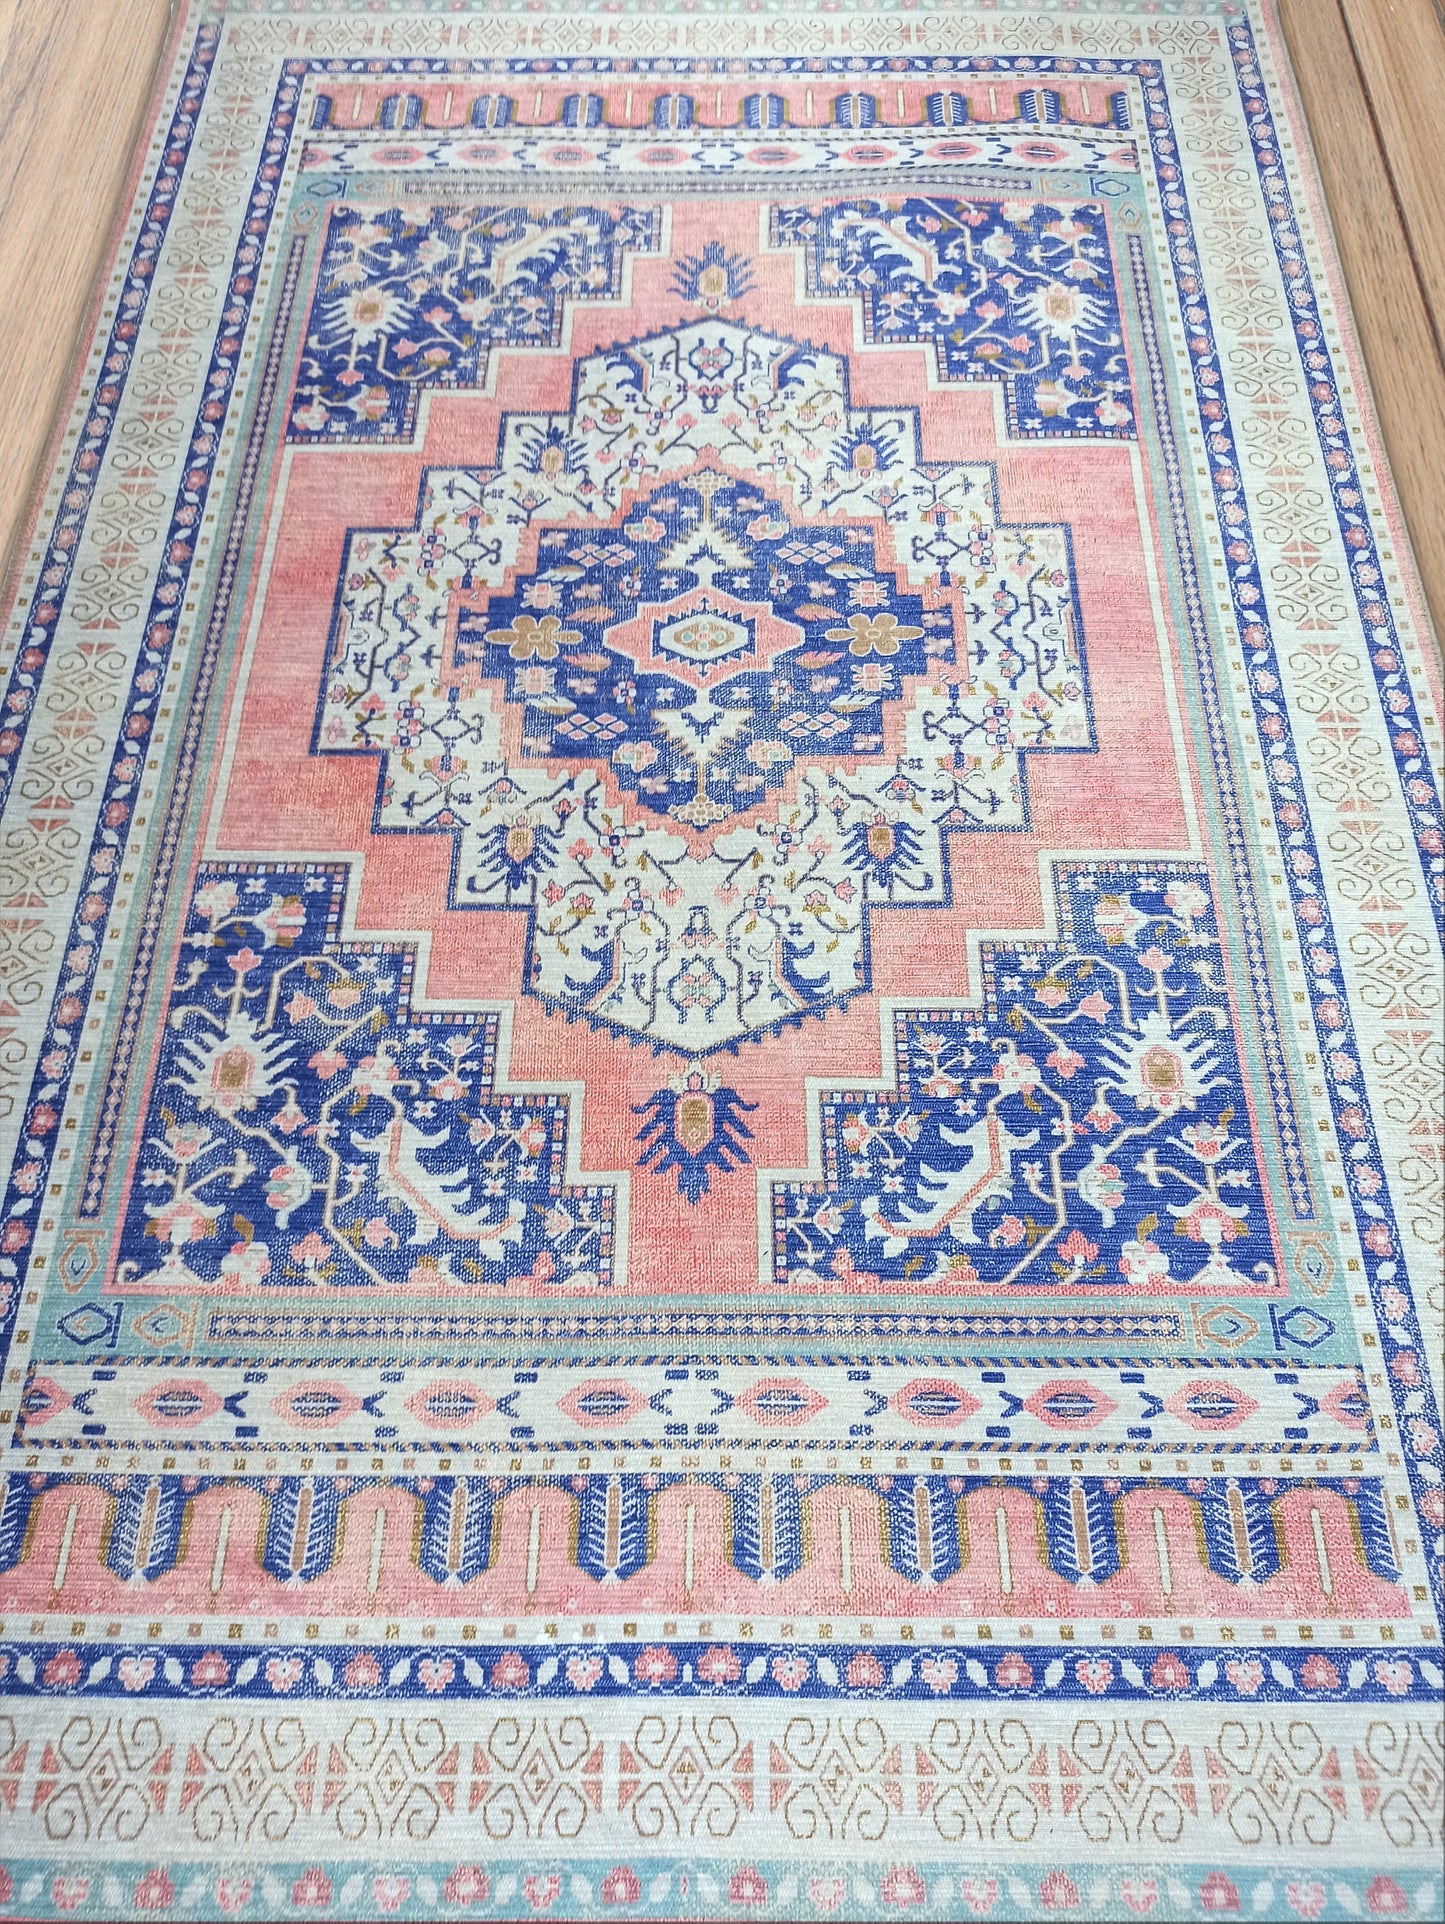 Persian Vintage Rug, Shades of Pale Pink & Midnight Navy Blue Oriental Antique Hamadan Inspired Shabby Chic Area Rugs Living room Bedroom